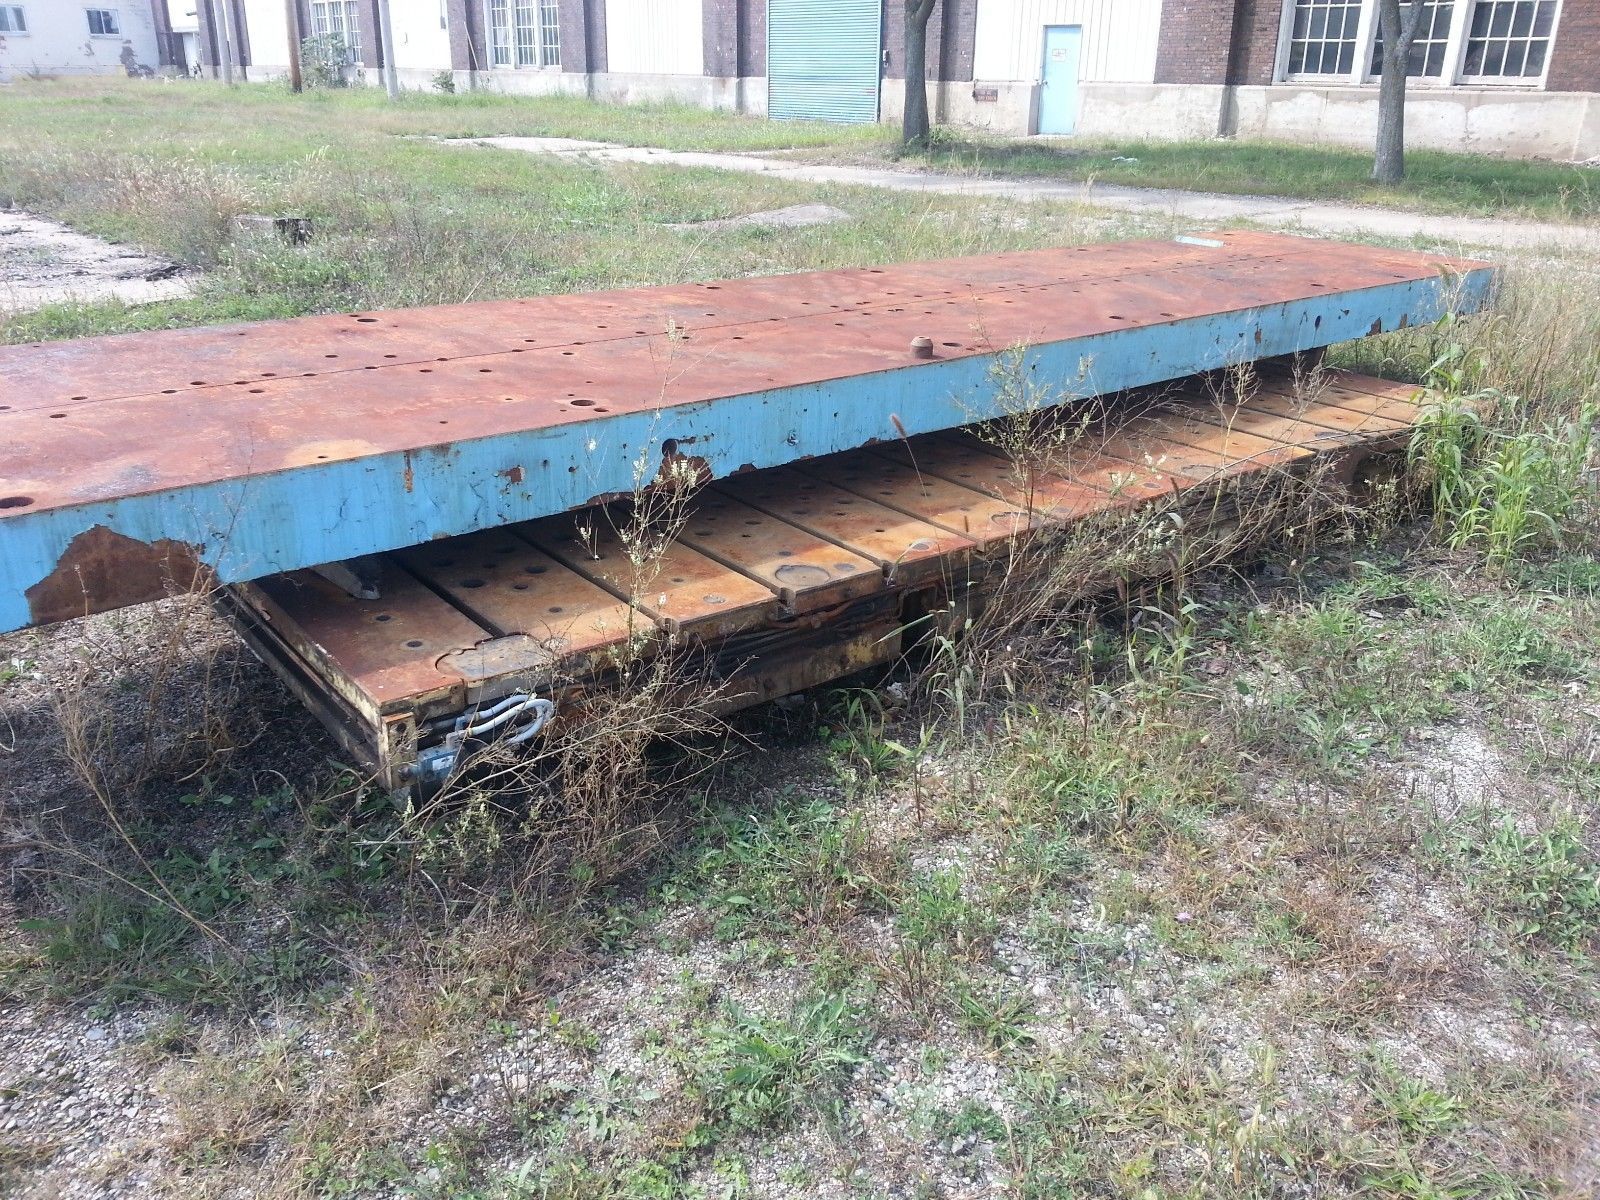 Used Bolster Plate For Sale 168" x 100" x 10"